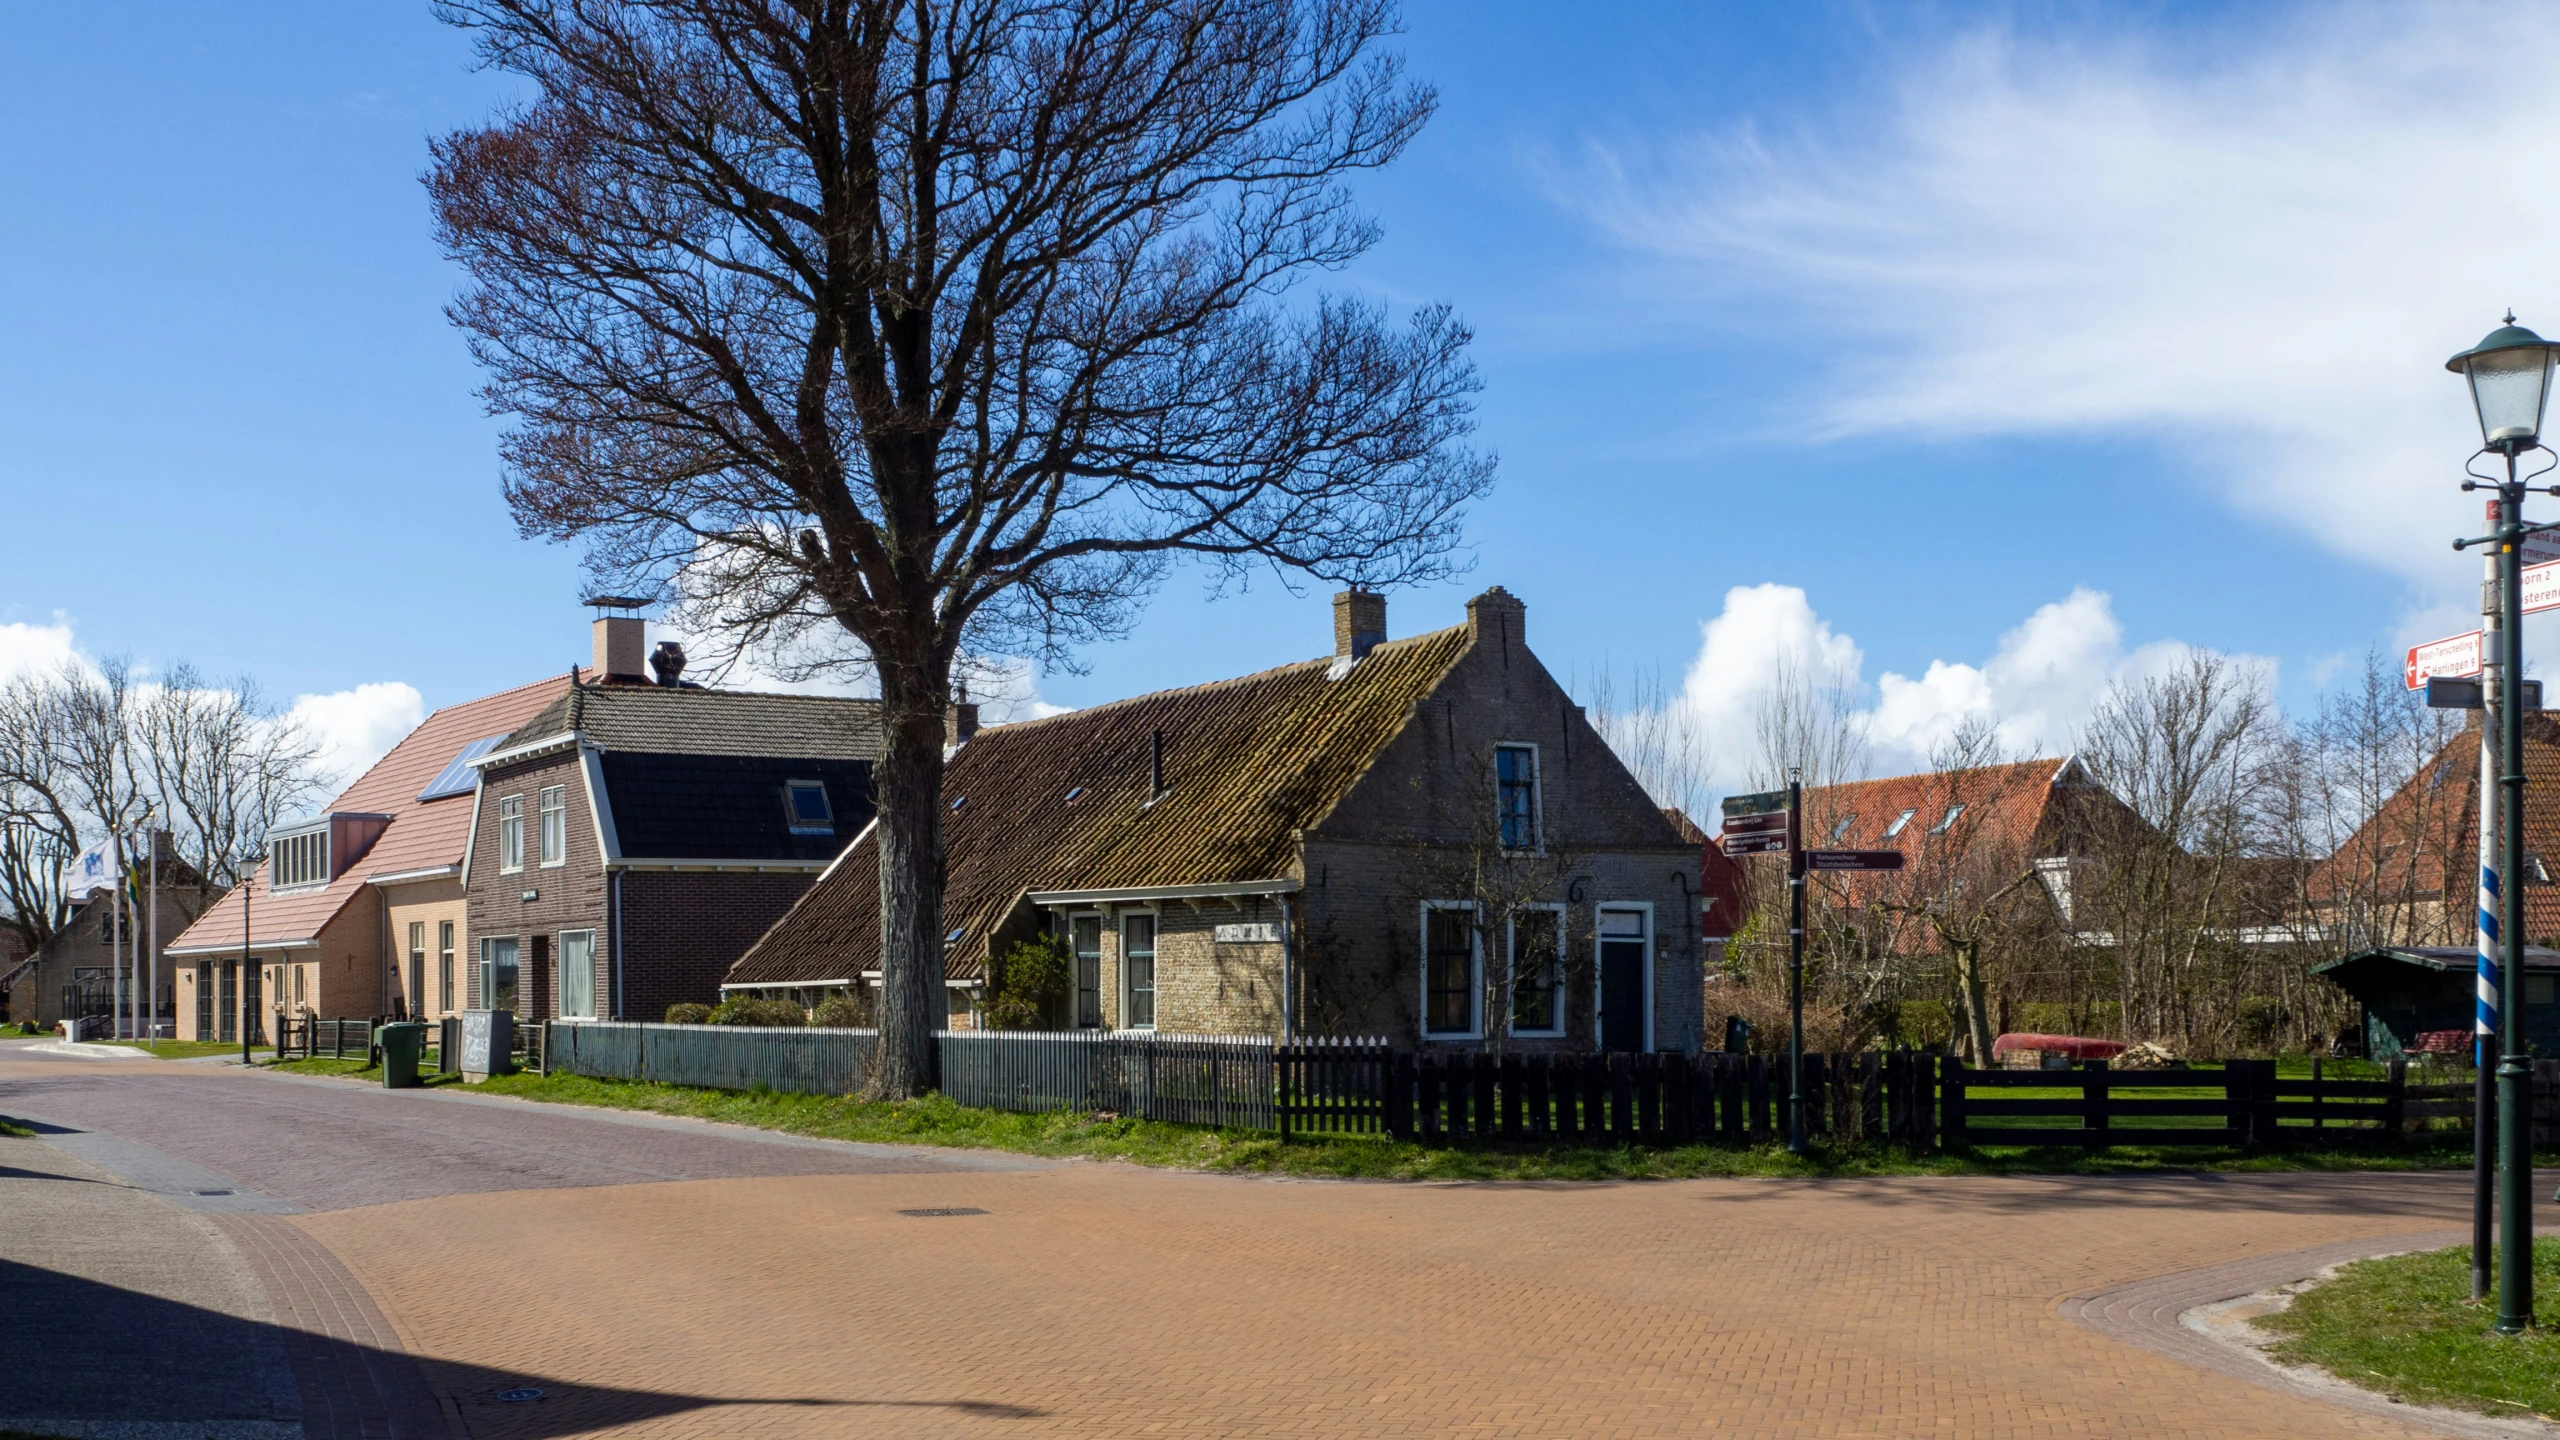 the brick town is lined with three old houses